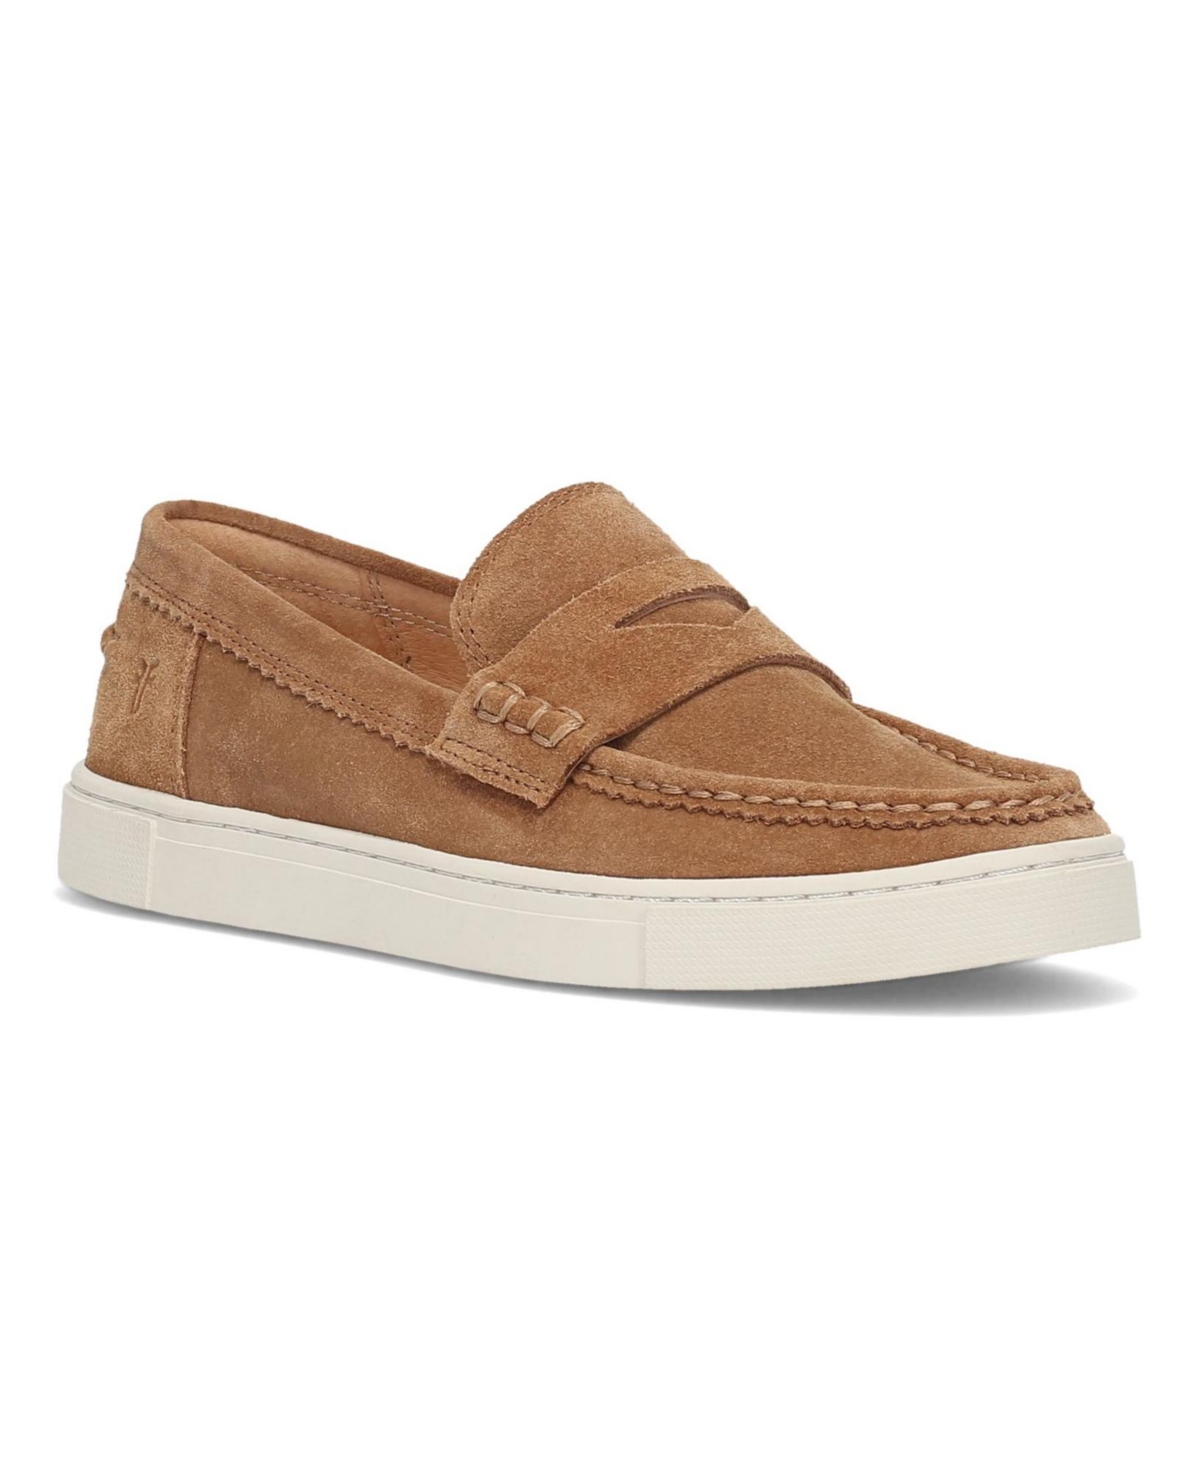 Women's Ivy Suede Penny Loafers - Almond